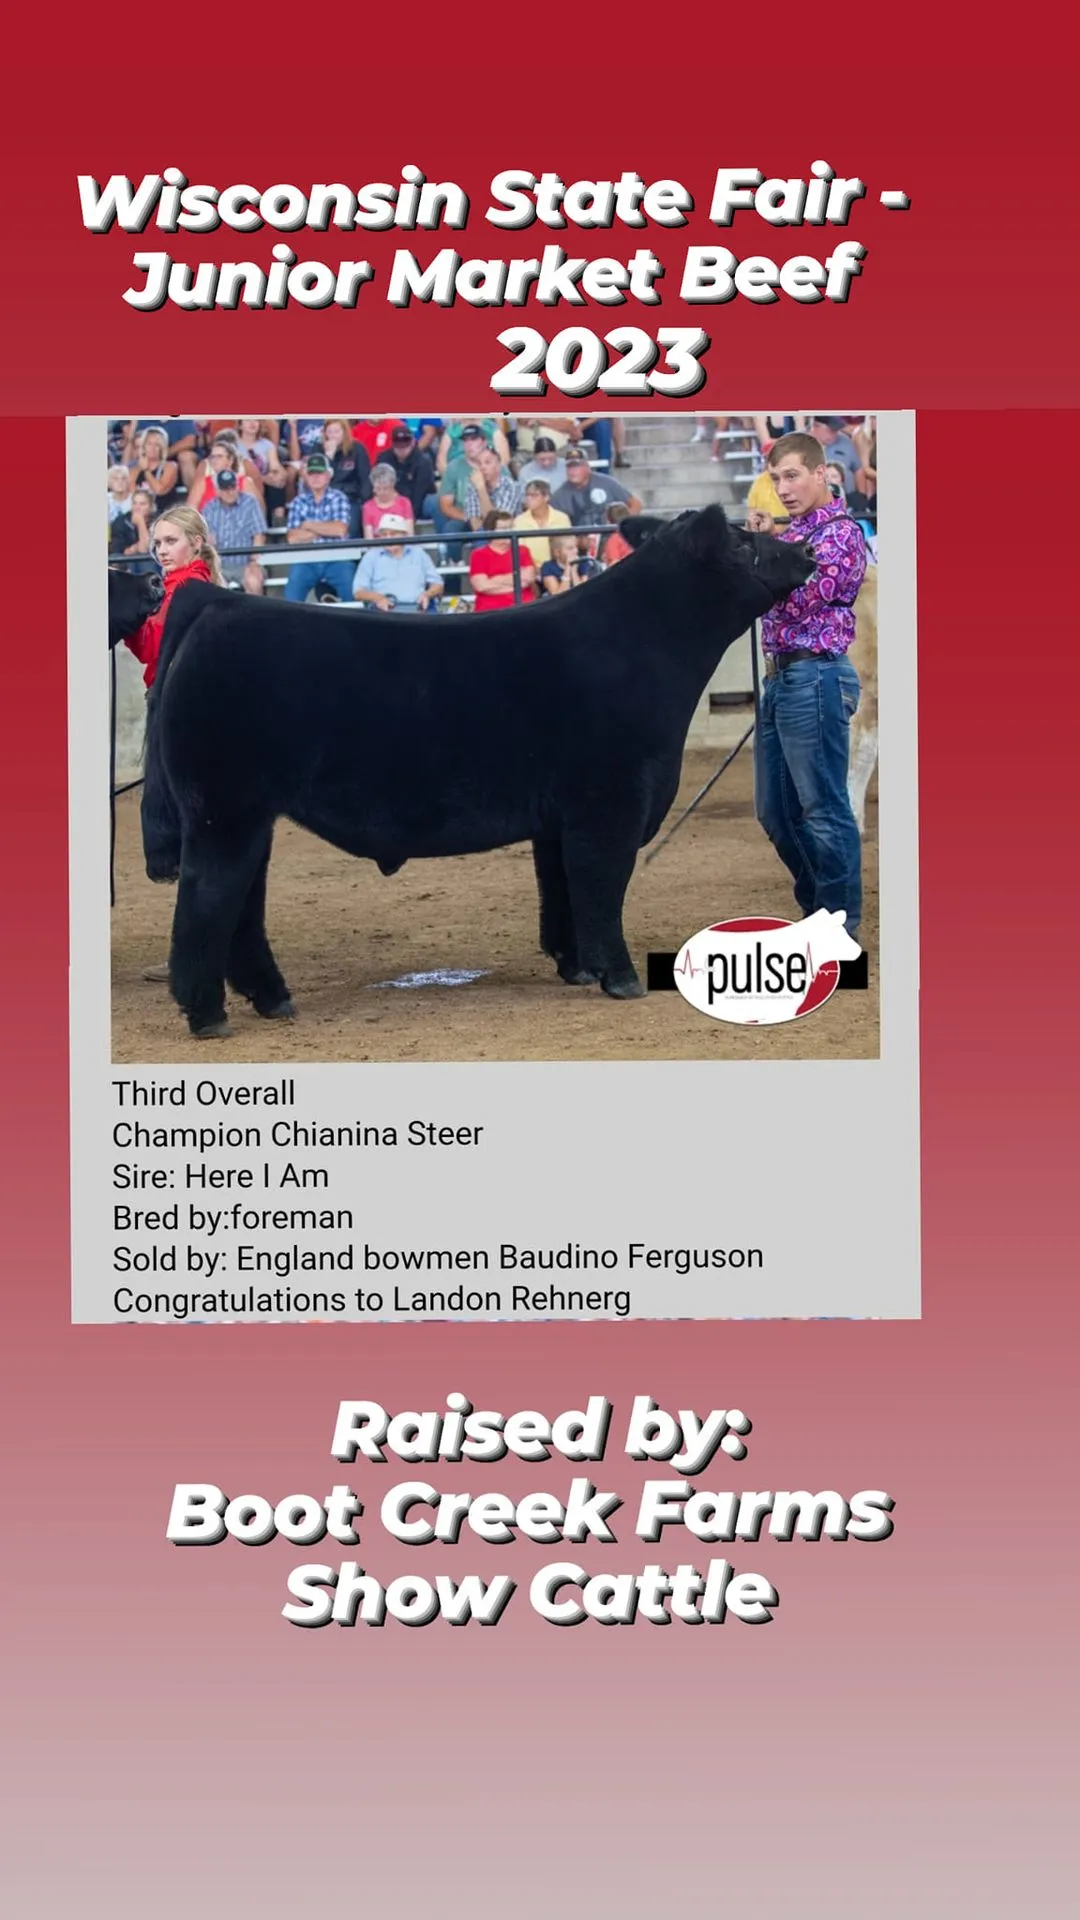 Wisconsin State Fair 2023 - Junior Market Beef - Third Overall with the Chianina - Shown by Landon Rehnerg - Sire HIA Here I Am